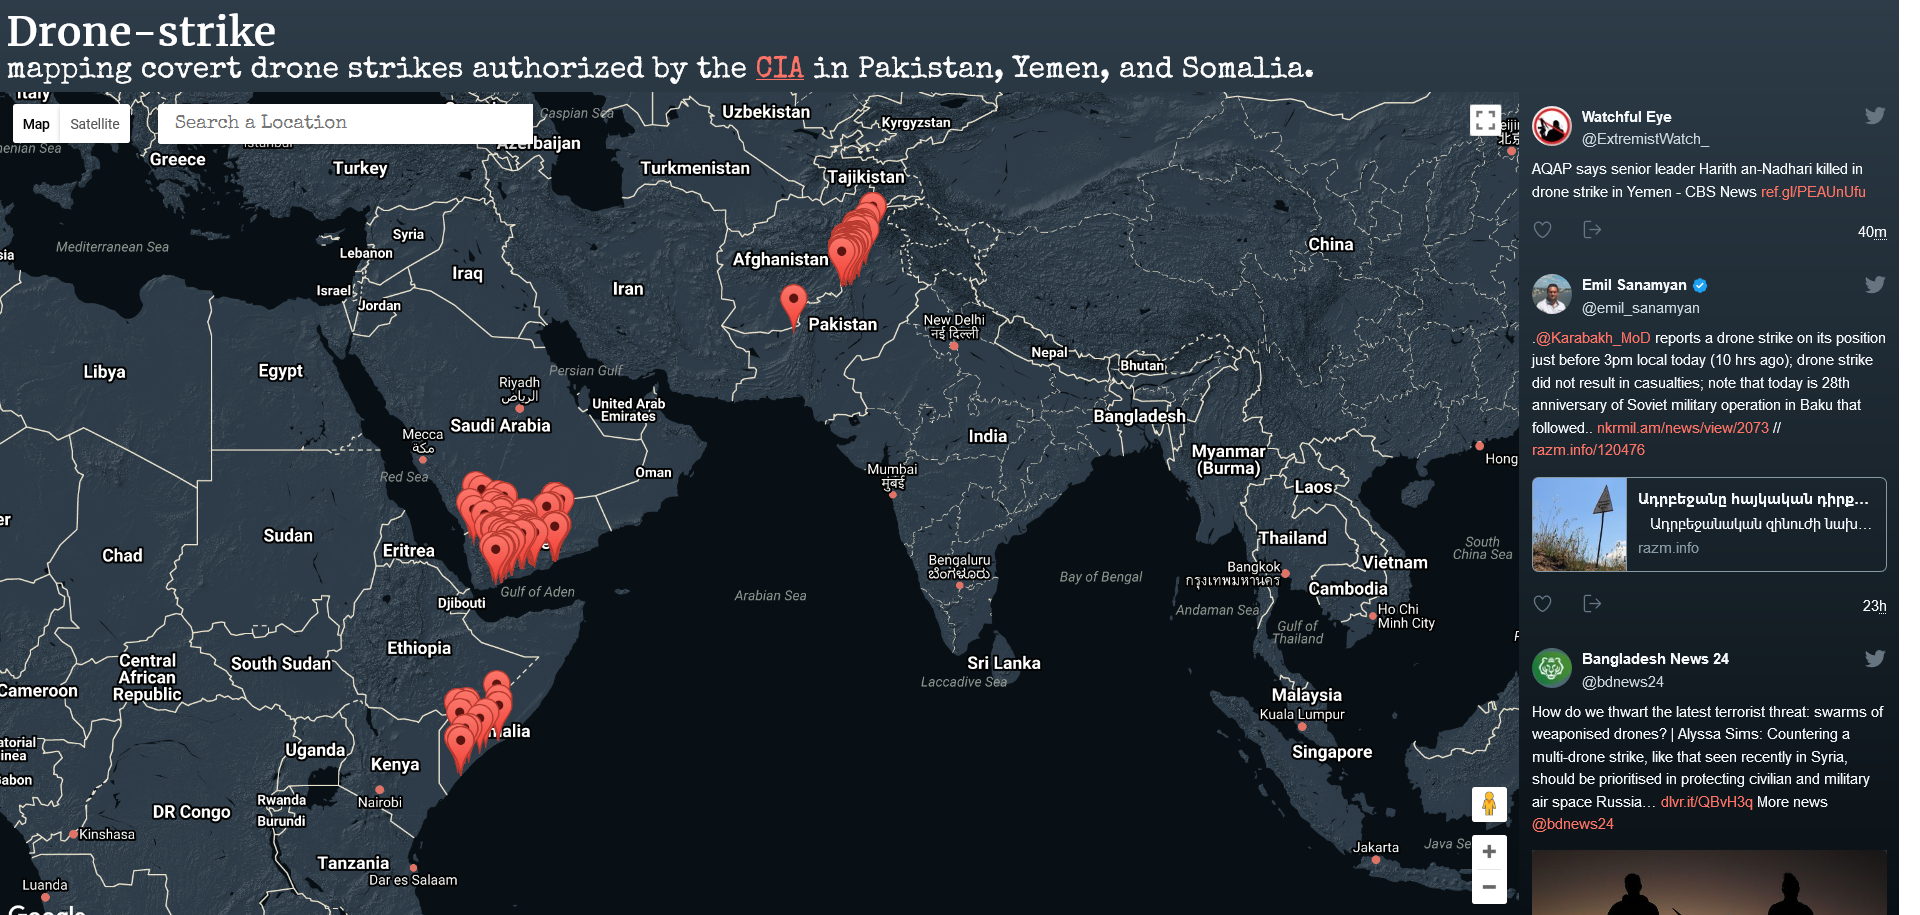 Second version of drone-strike map